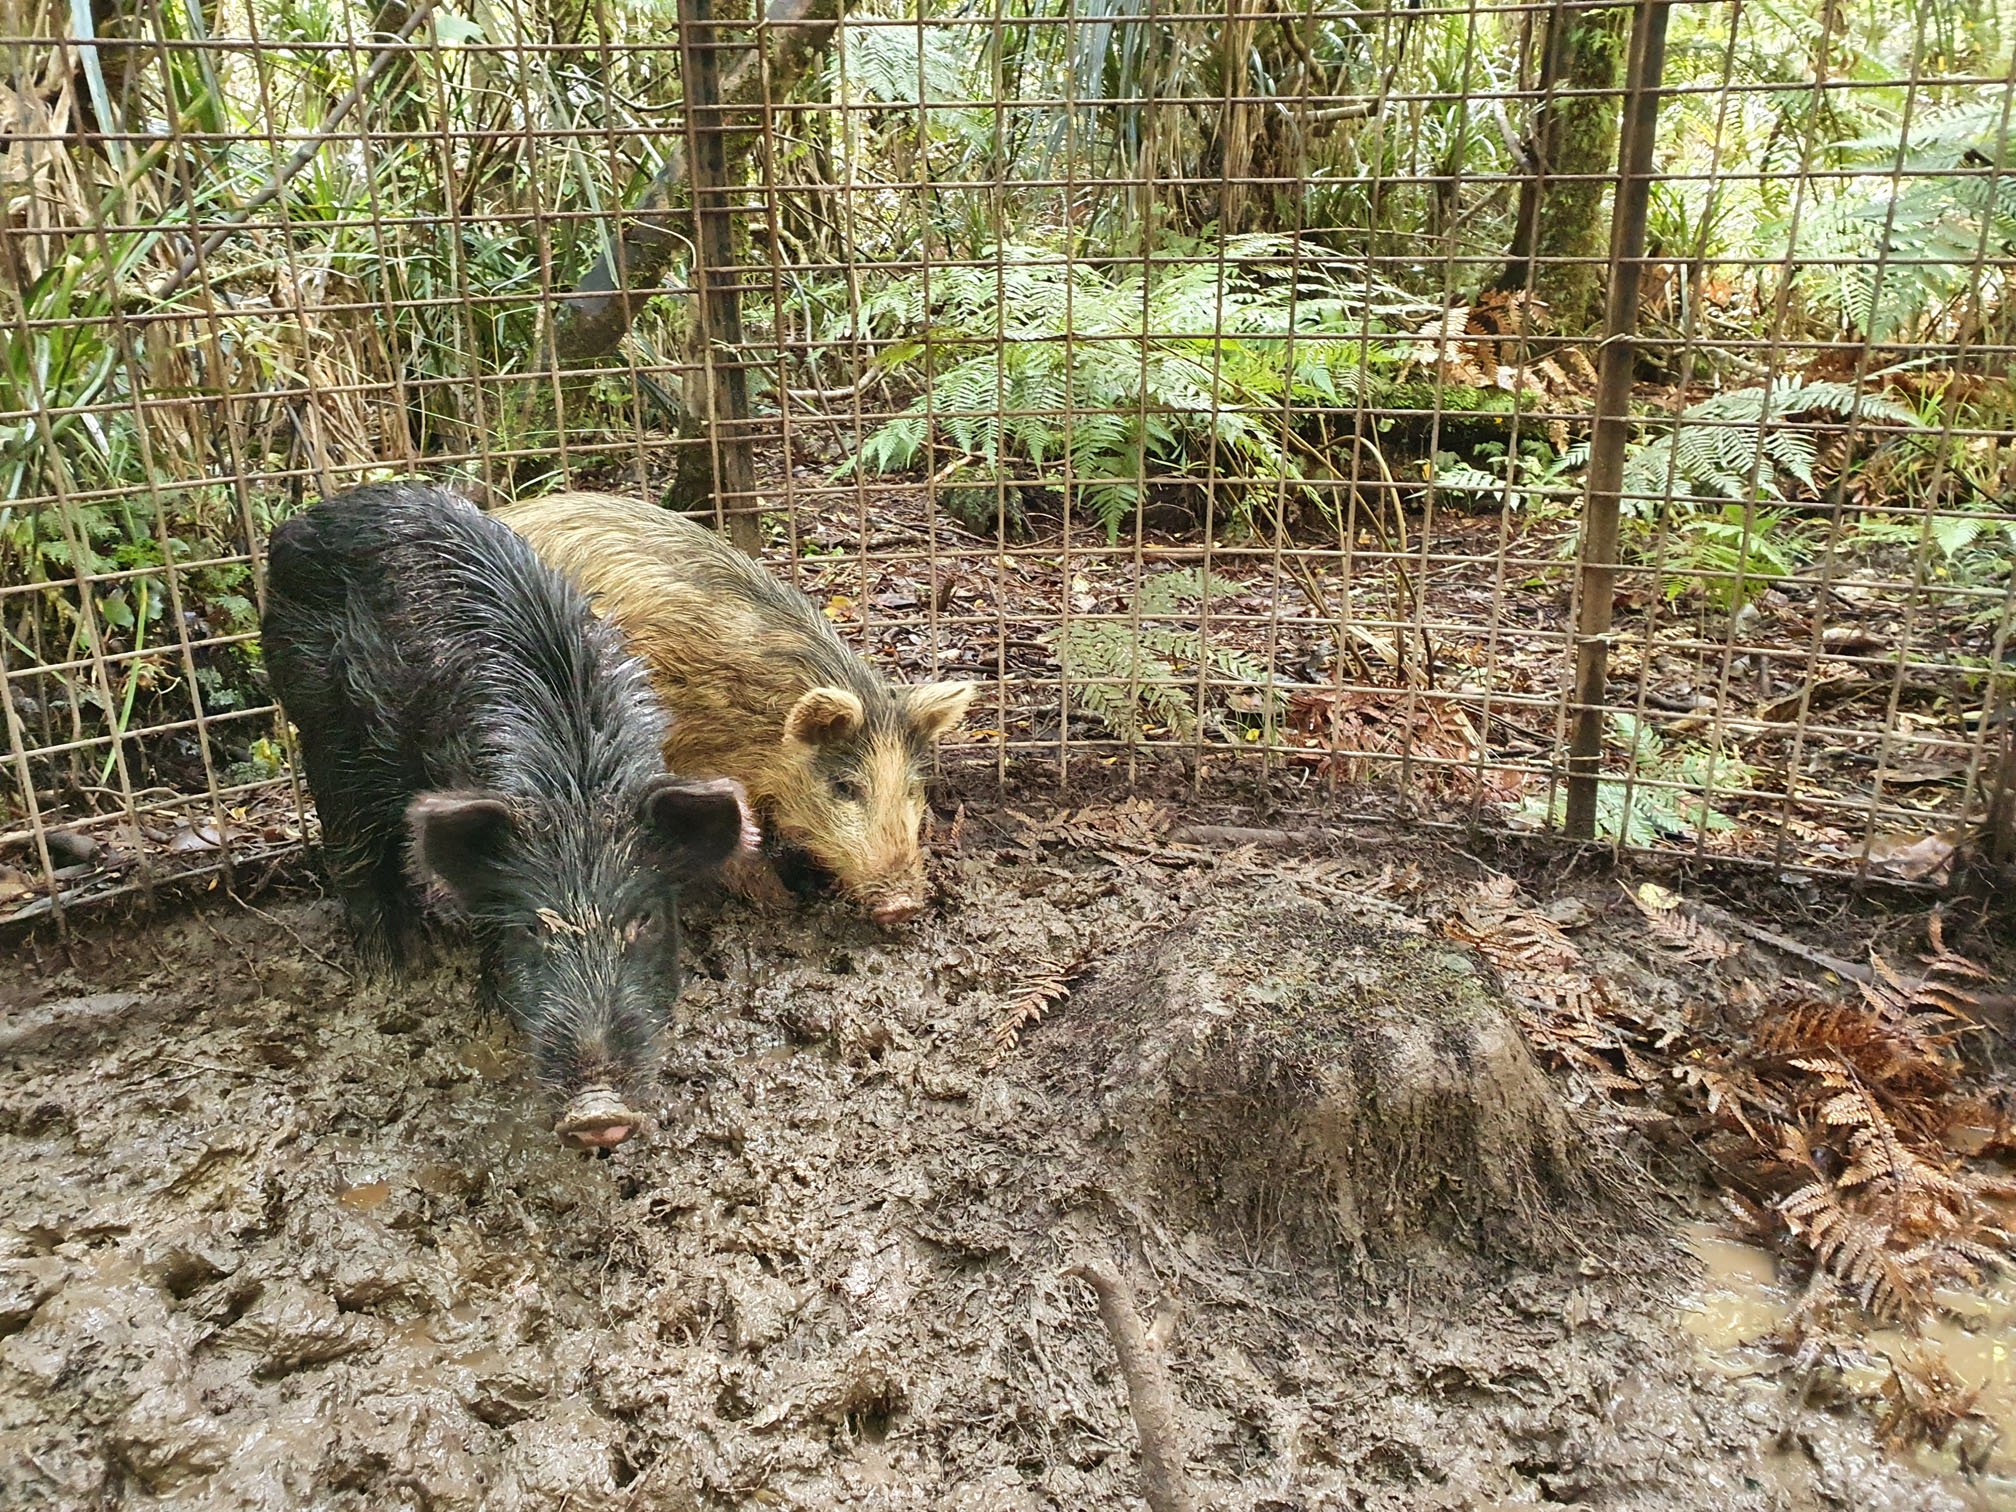 Feral pigs in a trap on the Puketi plateau. Photo by Rigel Cotman